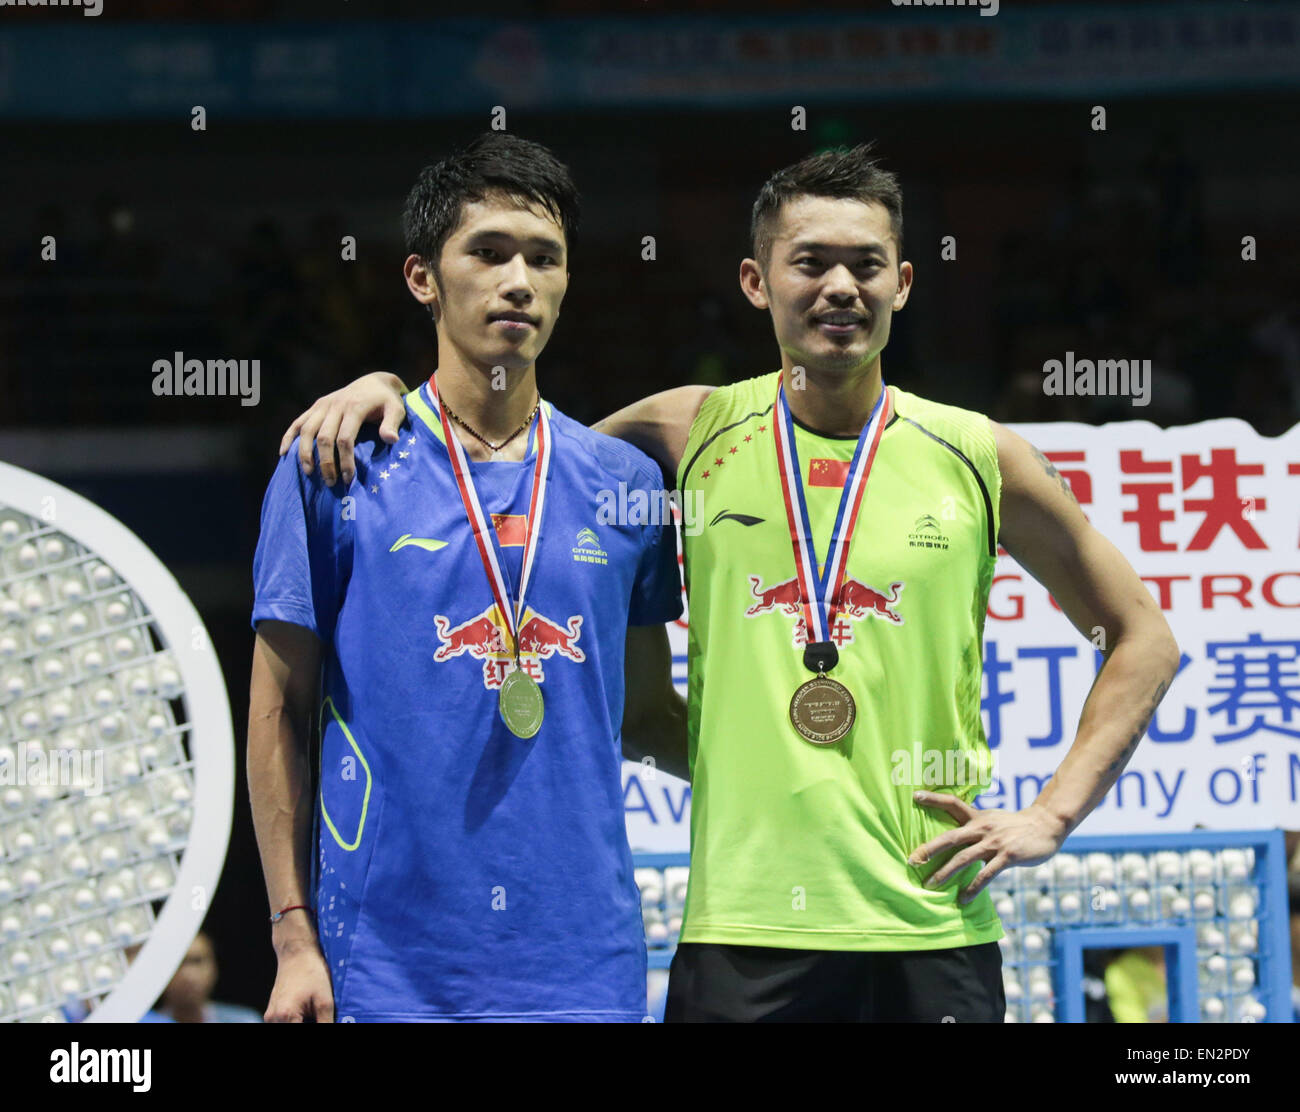 Dong Feng Citroen Badminton Asia Championships 2015 in Wuhan, China on April 26, 2015.Men's singles winner Lin Dan of China (R) poses with compatriot Tian Houwei following finals match. Stock Photo